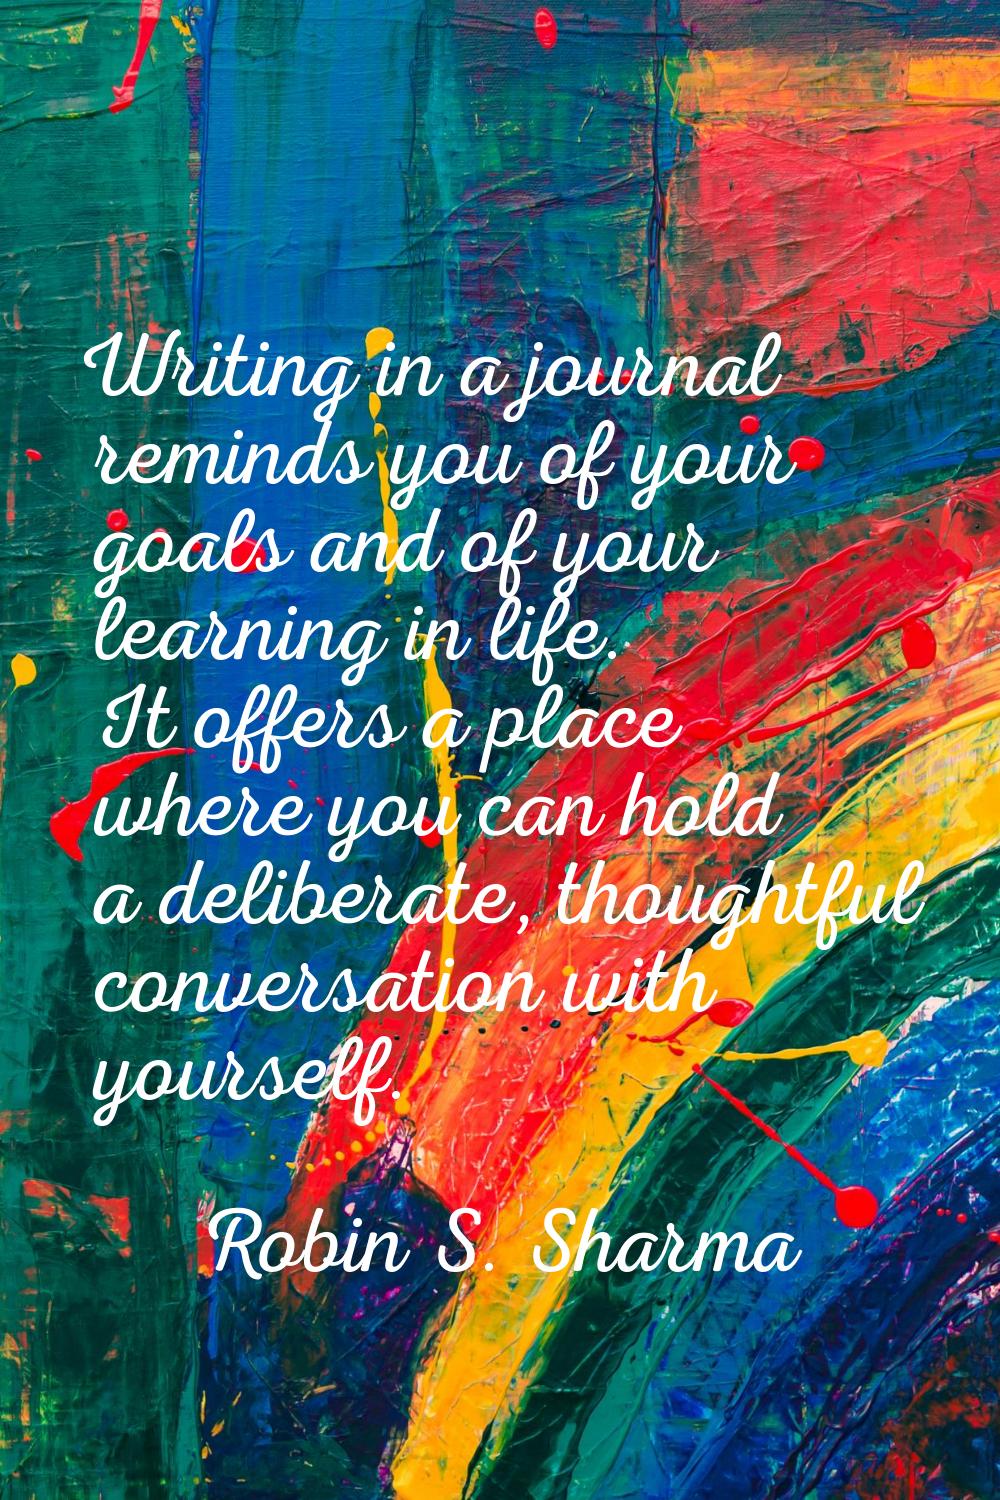 Writing in a journal reminds you of your goals and of your learning in life. It offers a place wher